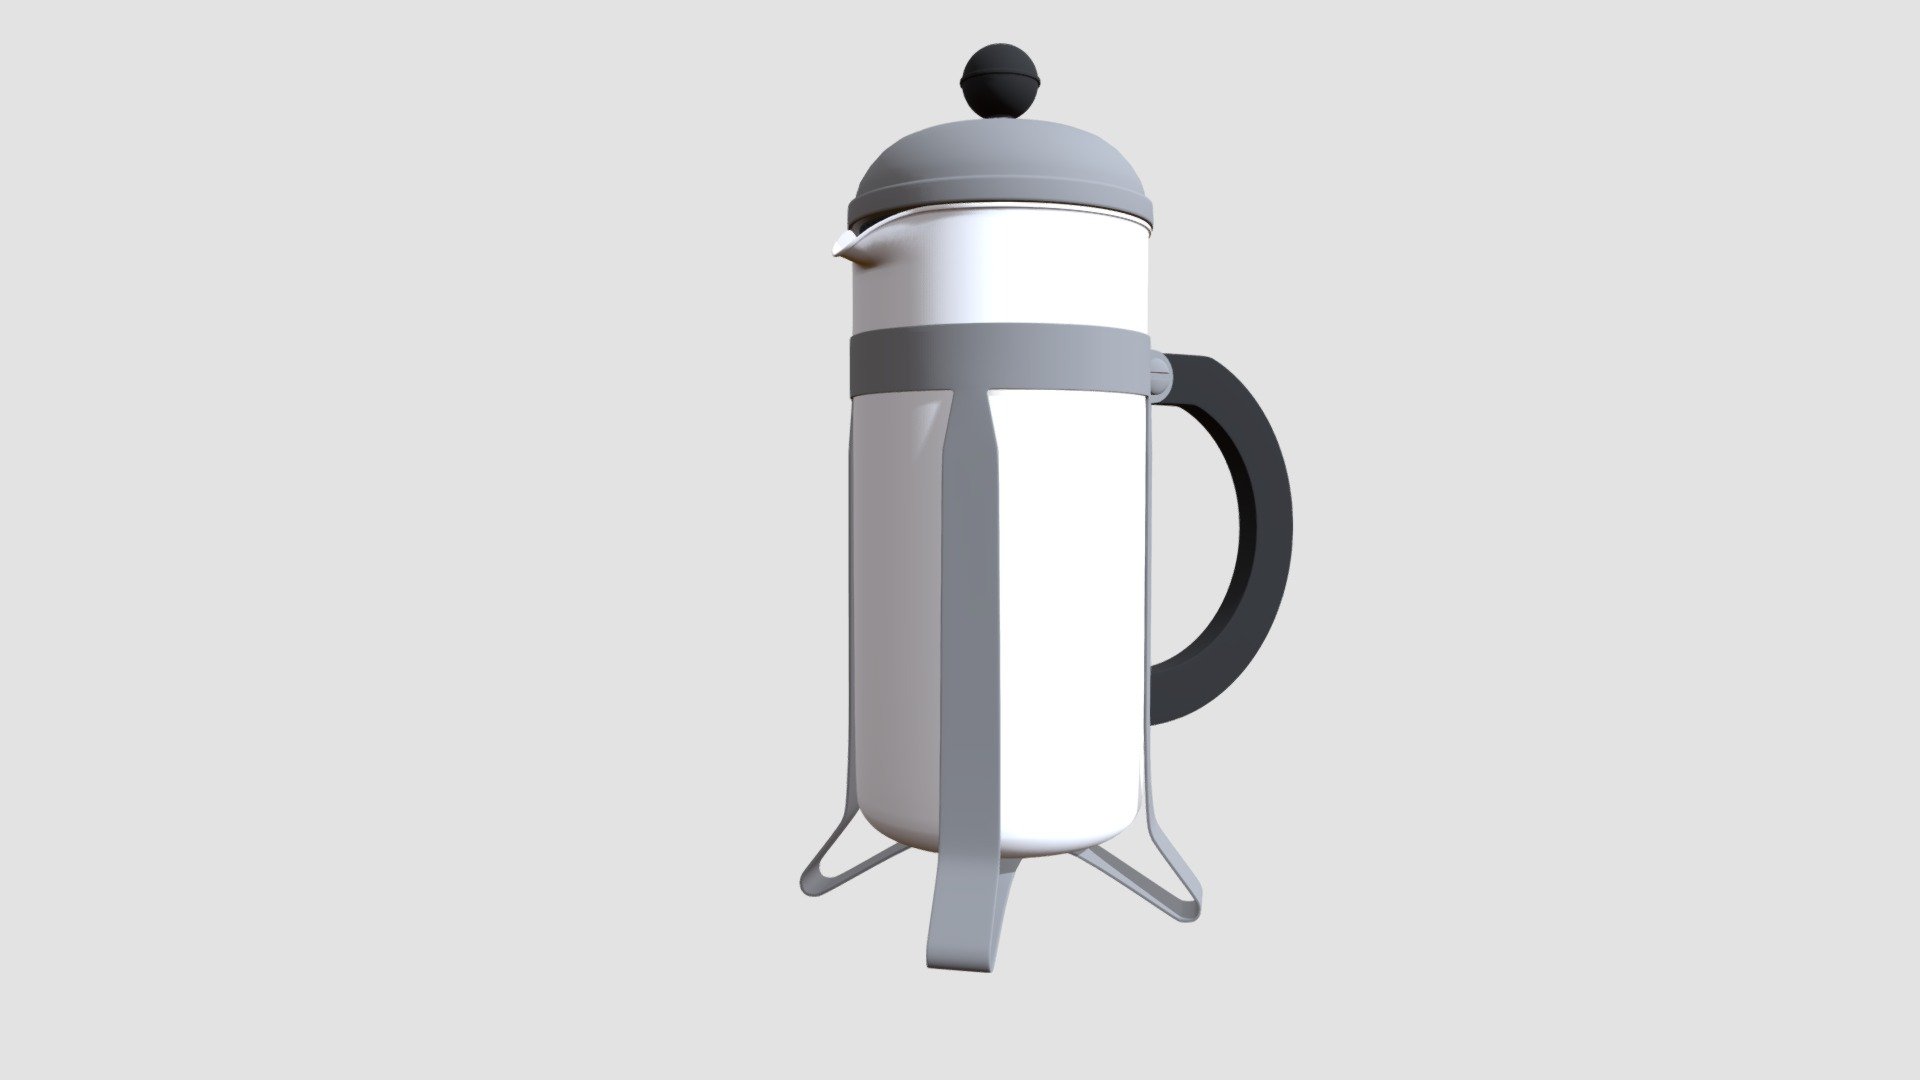 Highly detailed 3d model of coffee maker with all textures, shaders and materials. It is ready to use, just put it into your scene 3d model